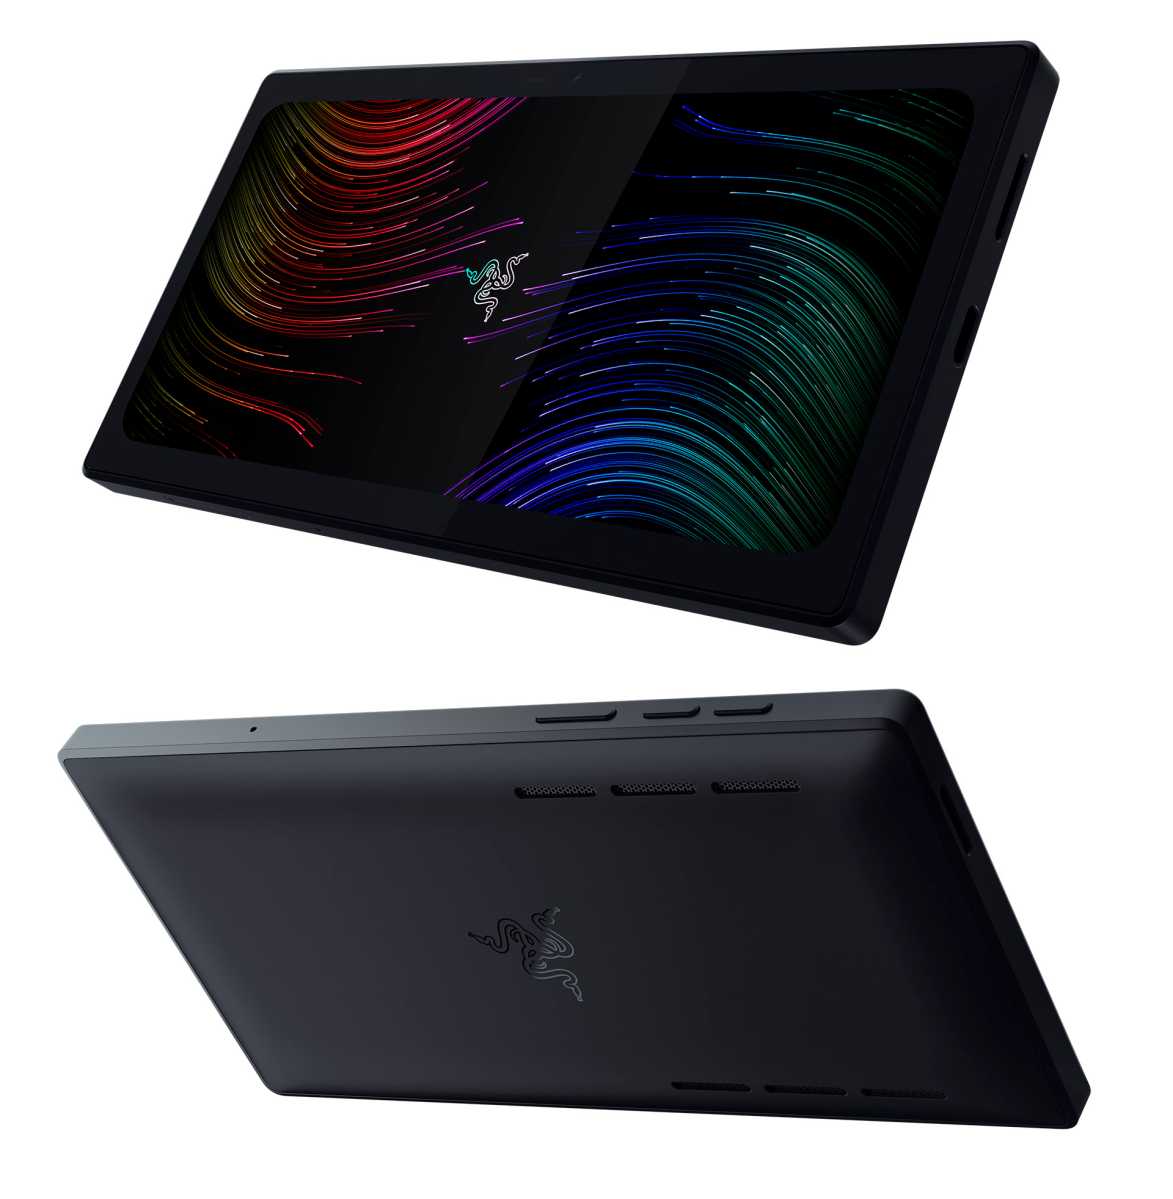 Razer Edge tablet front and rear